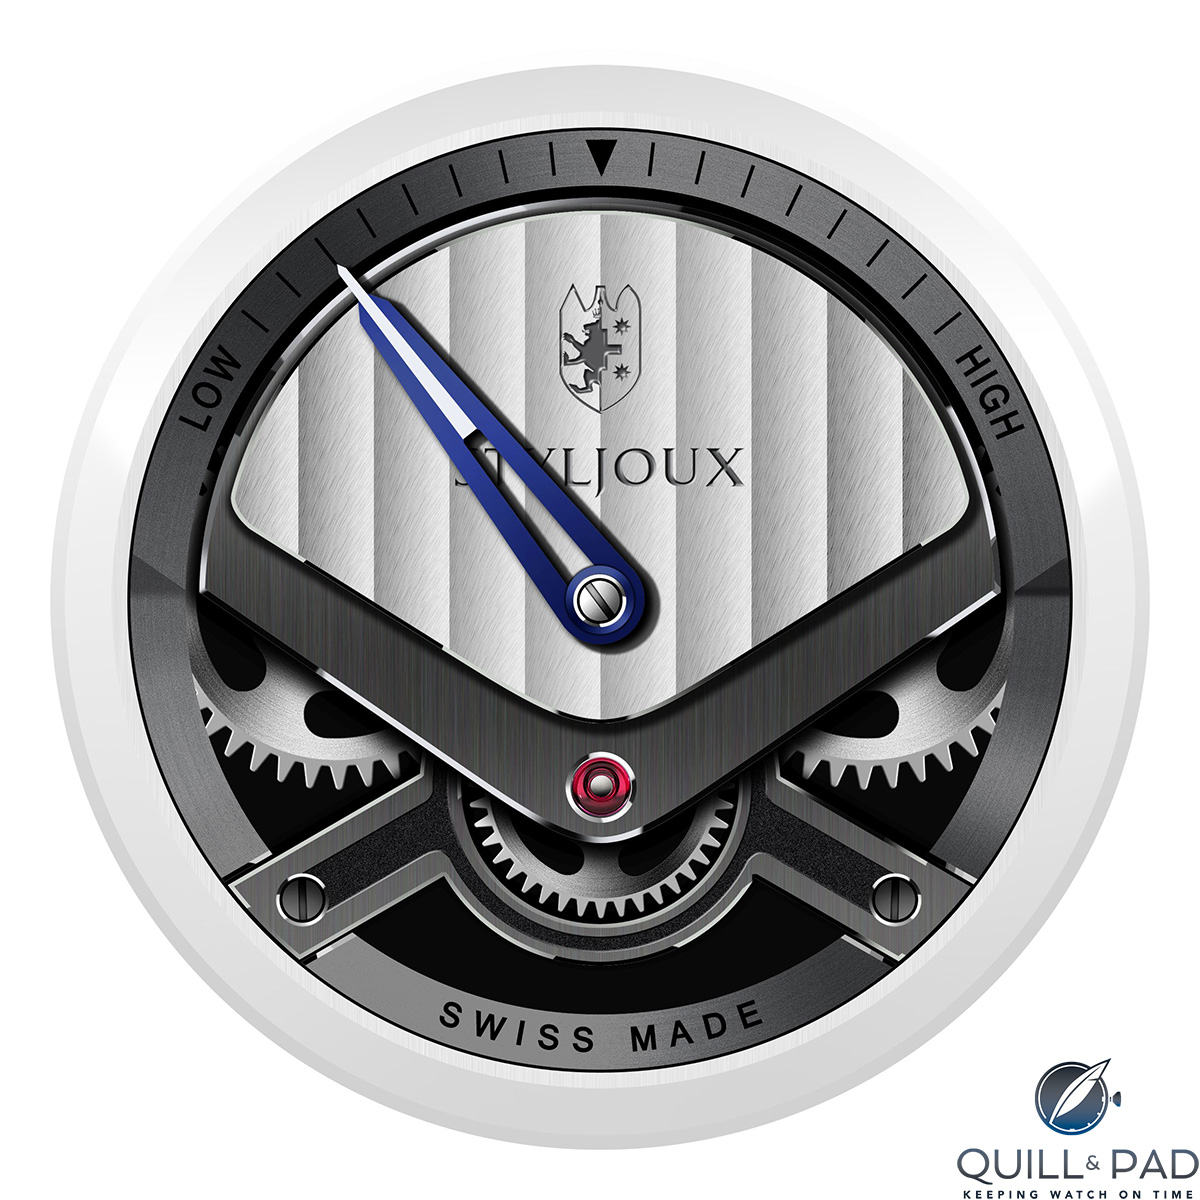 The Styljoux Le Calibre Pen With Replica Watches Technology And A Stylish Dial